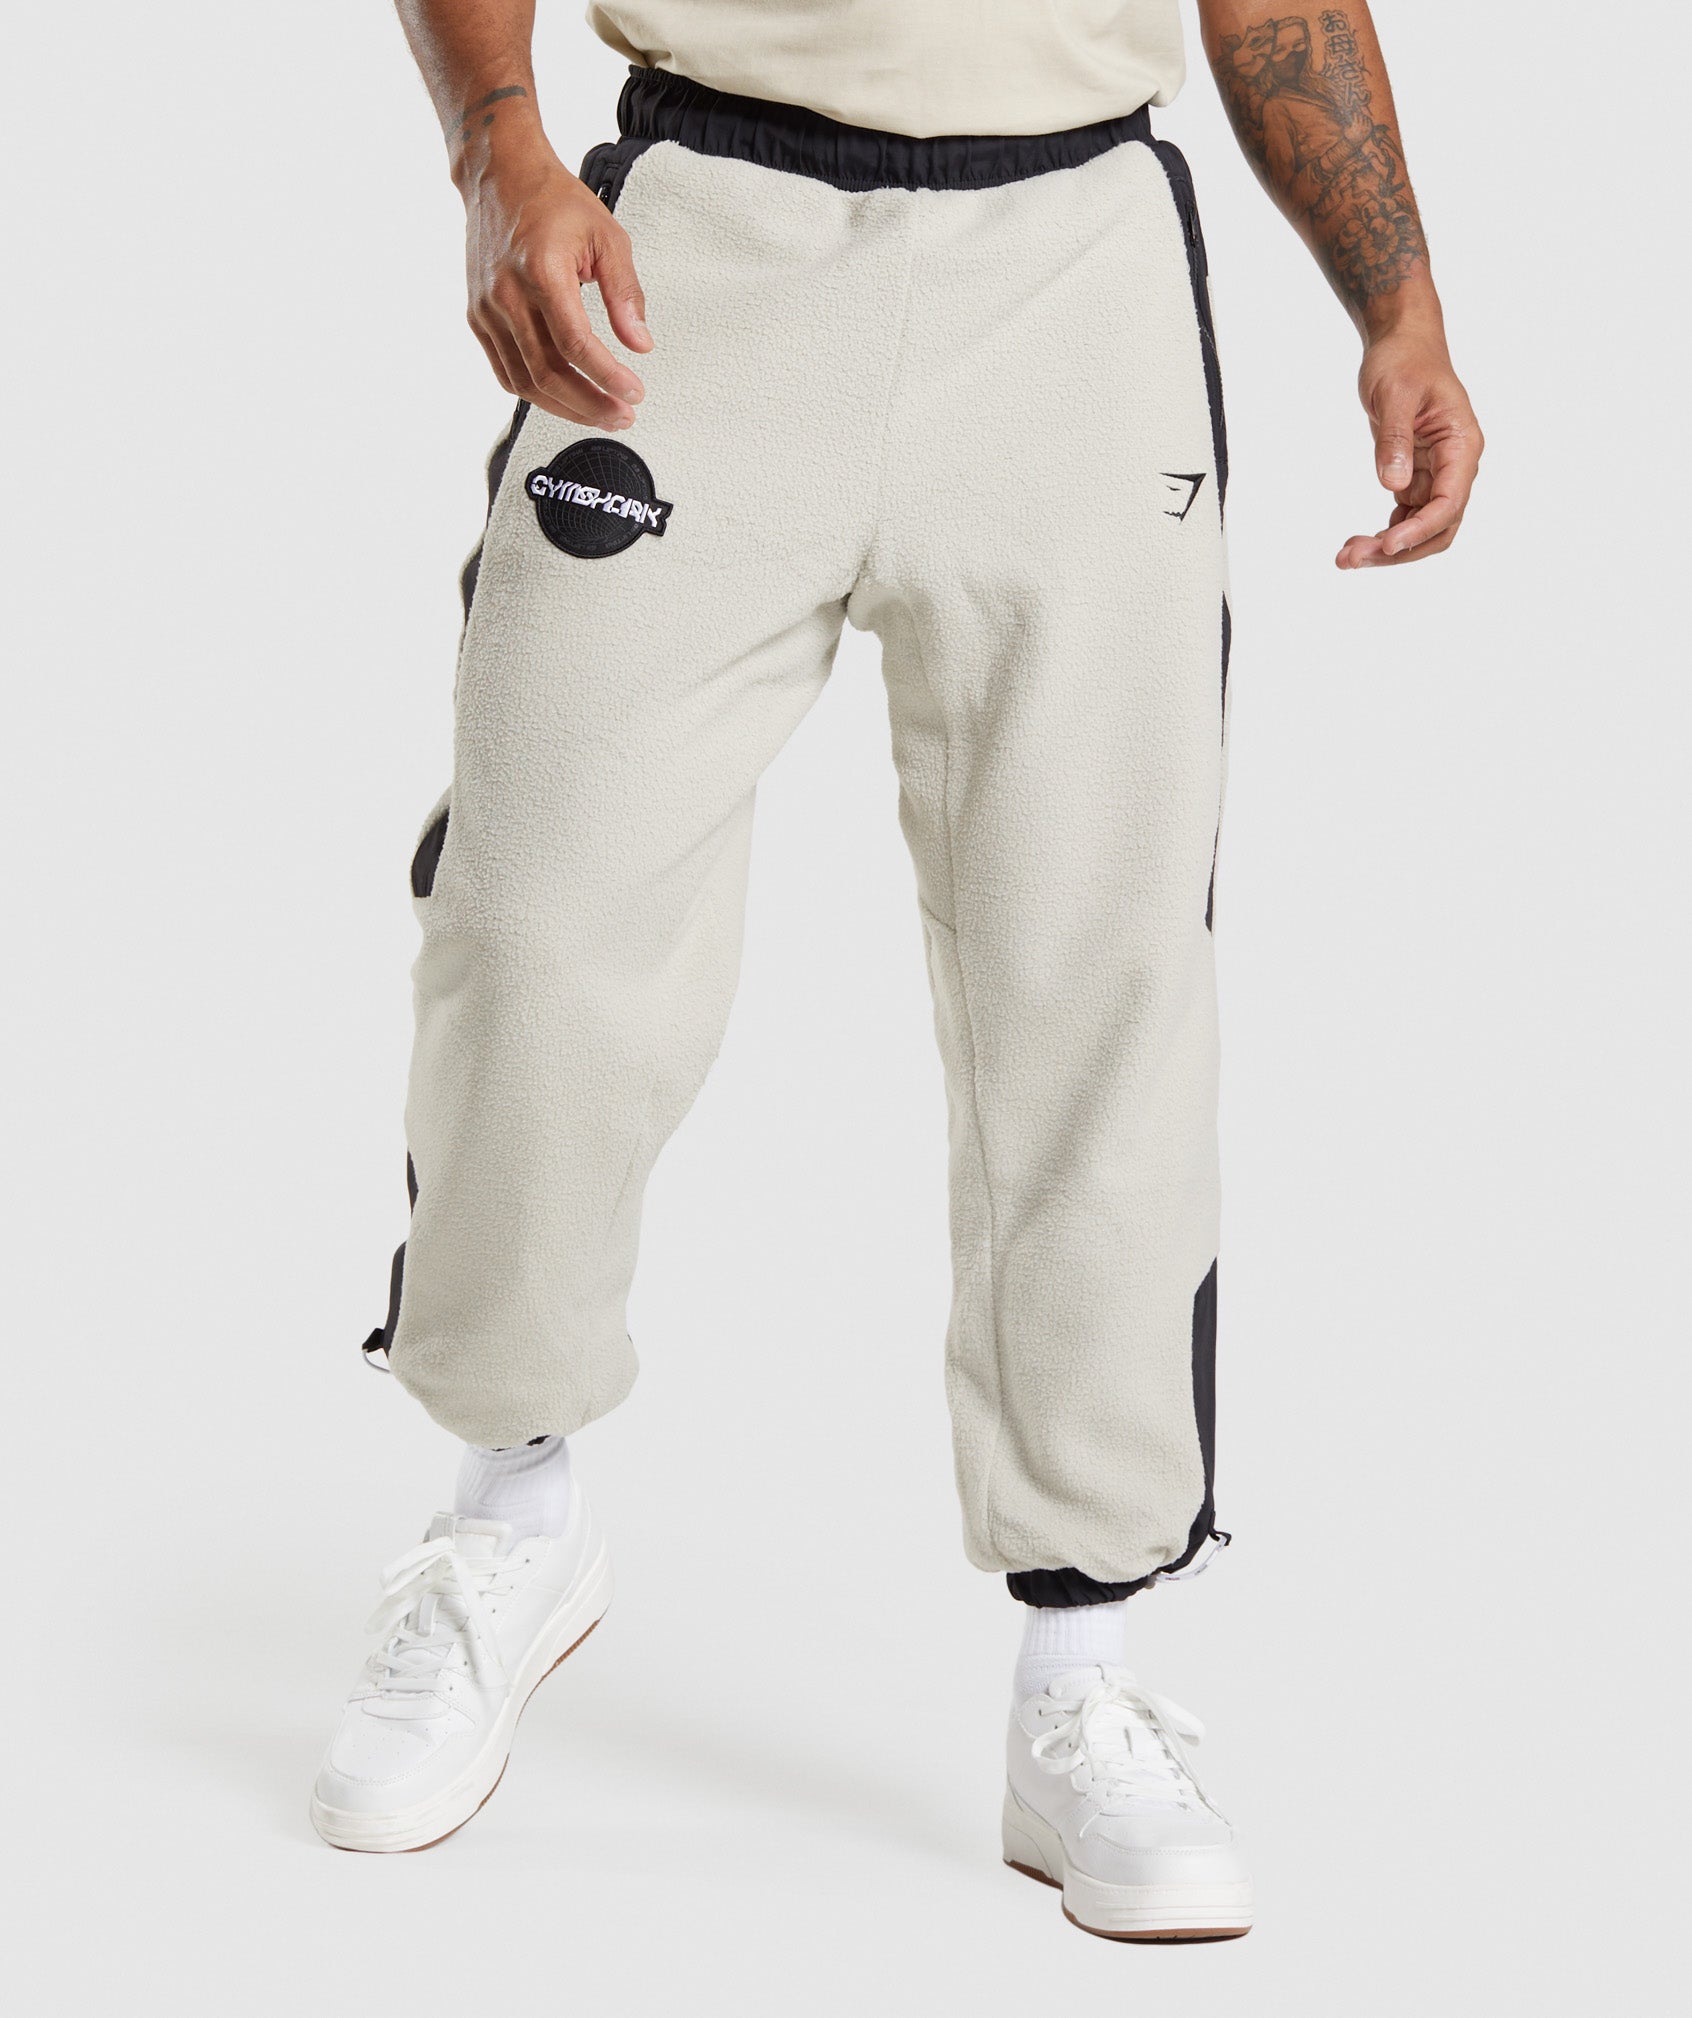 Vibes Joggers in Pebble Grey/Black - view 1